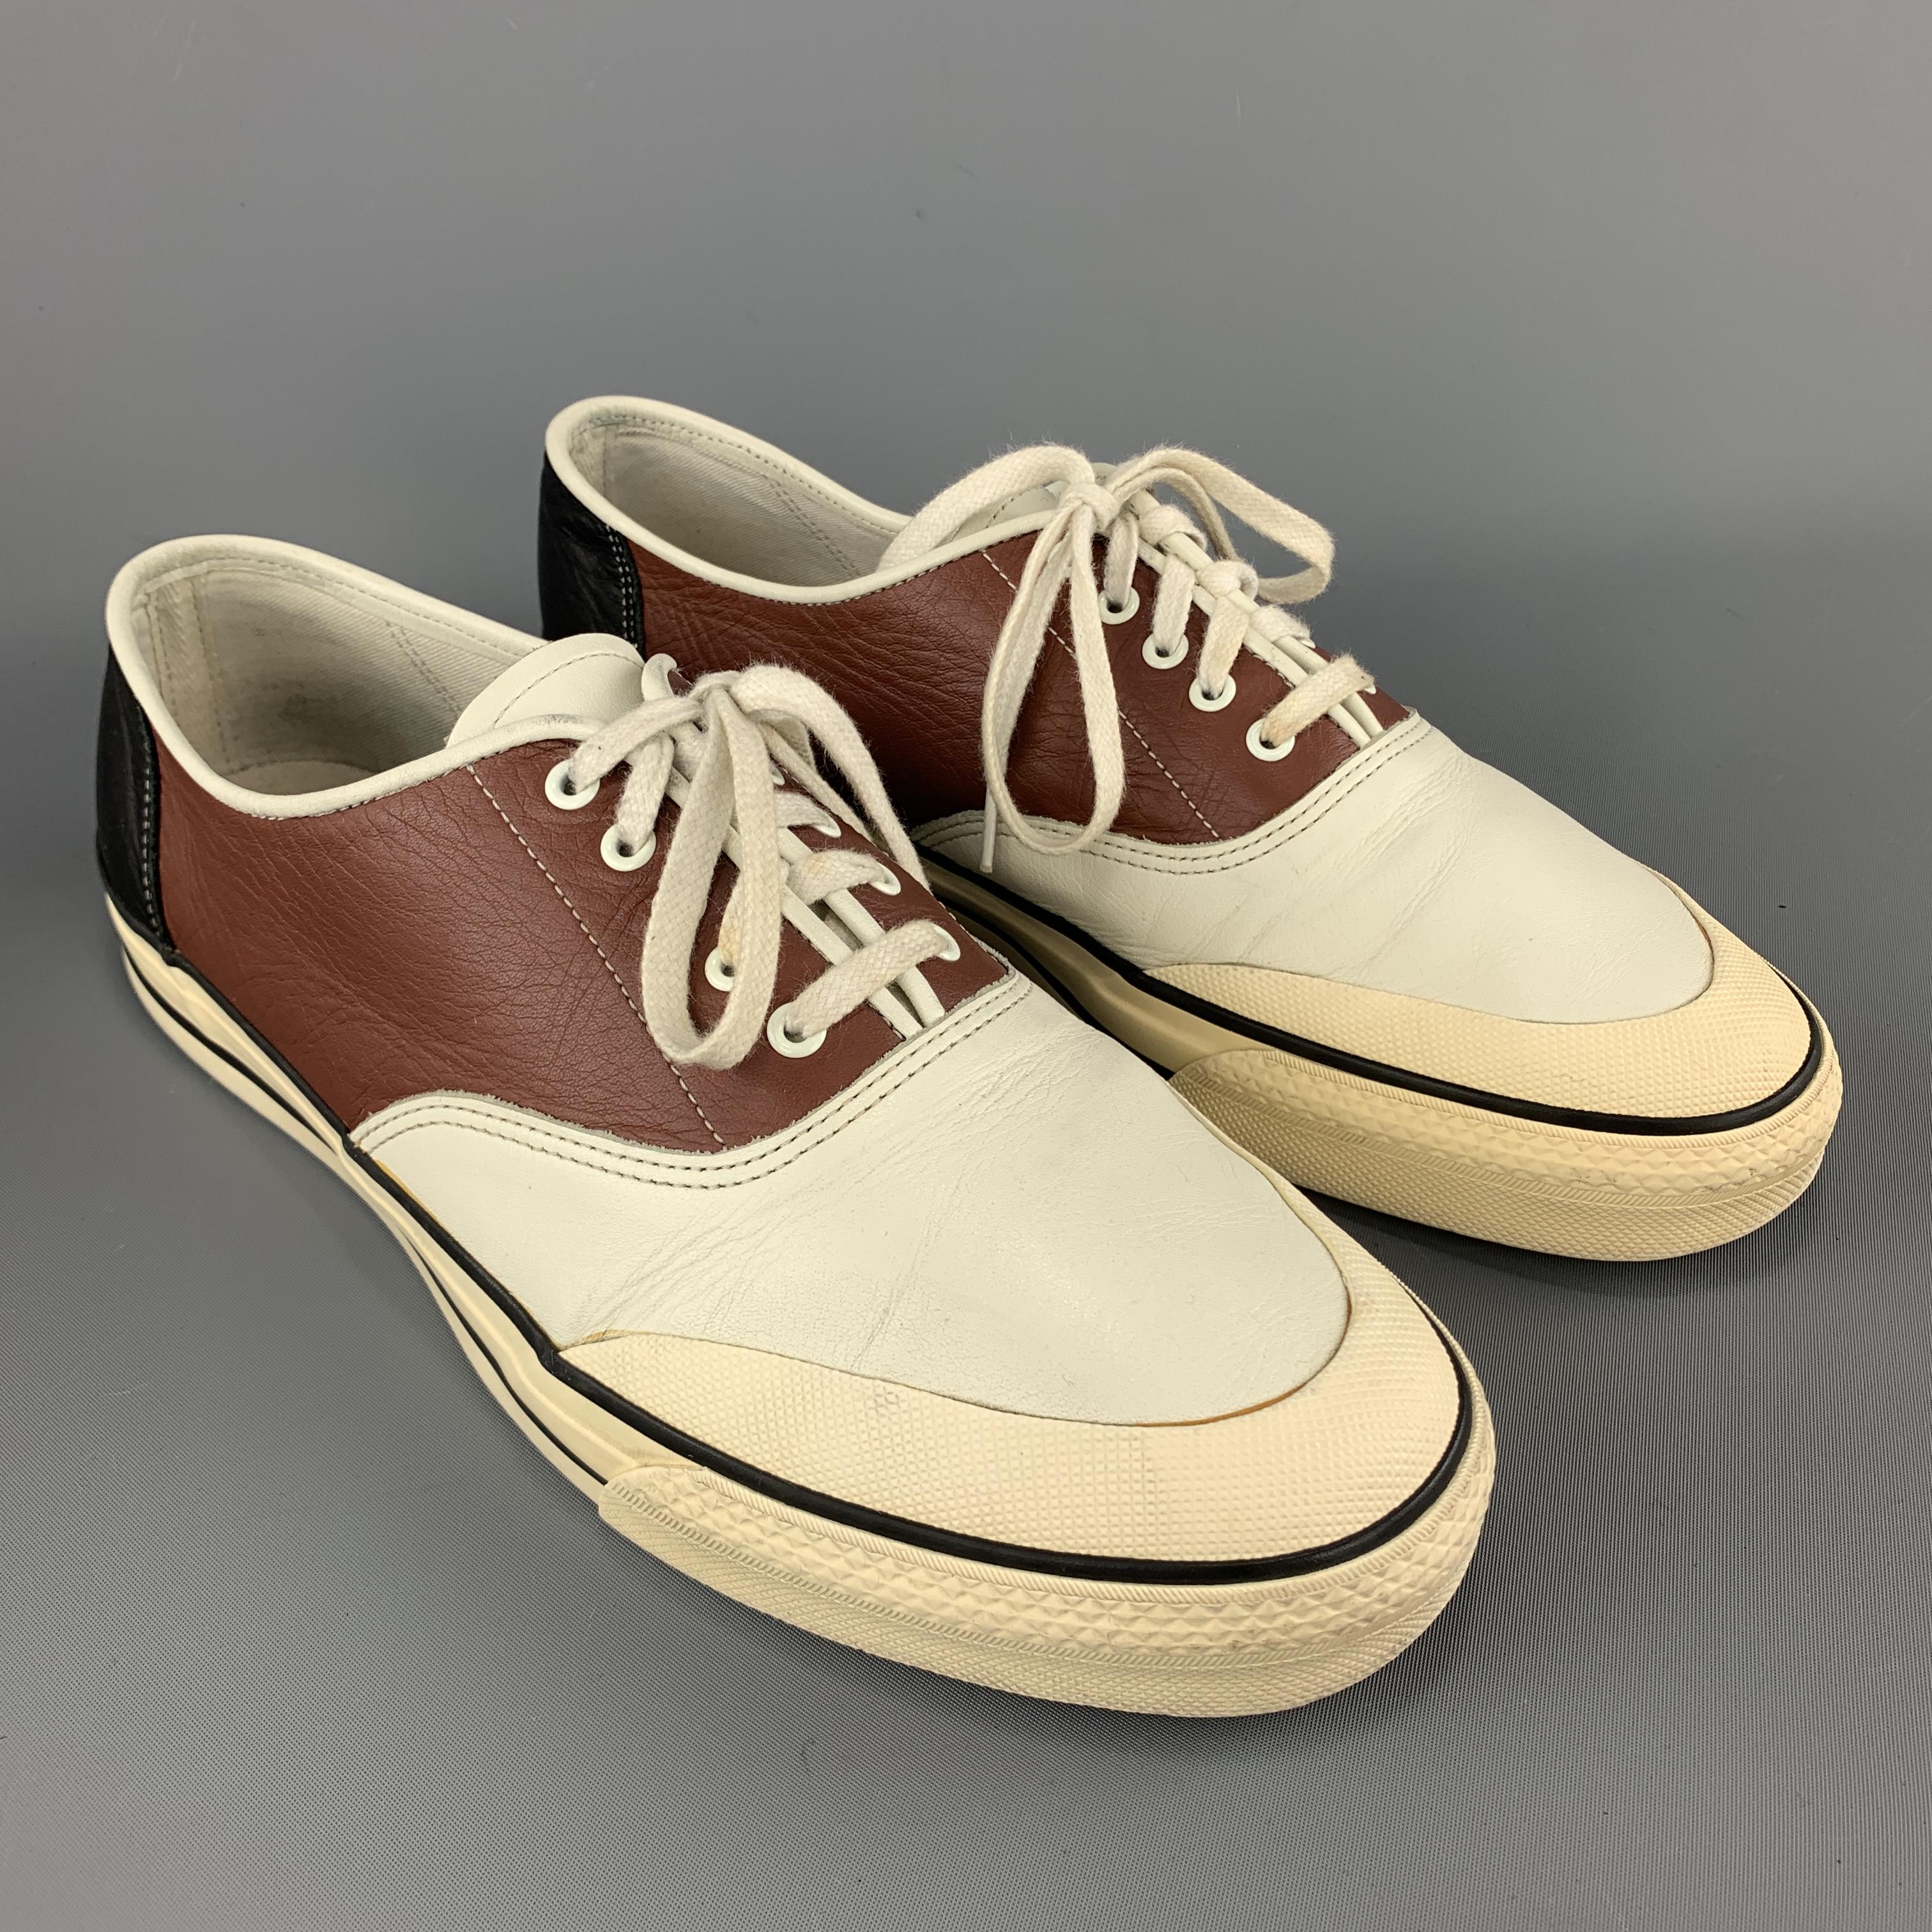 COMME des GARCONS HOMME PLUS Converse inspired low top sneakers come in brown leather with a cream toe panel, black heel panel, and beige rubber sole. With Box. Made in Japan.

Very Good Pre-Owned Condition.
Marked: 26.0

Outsole: 11 x 4 in.